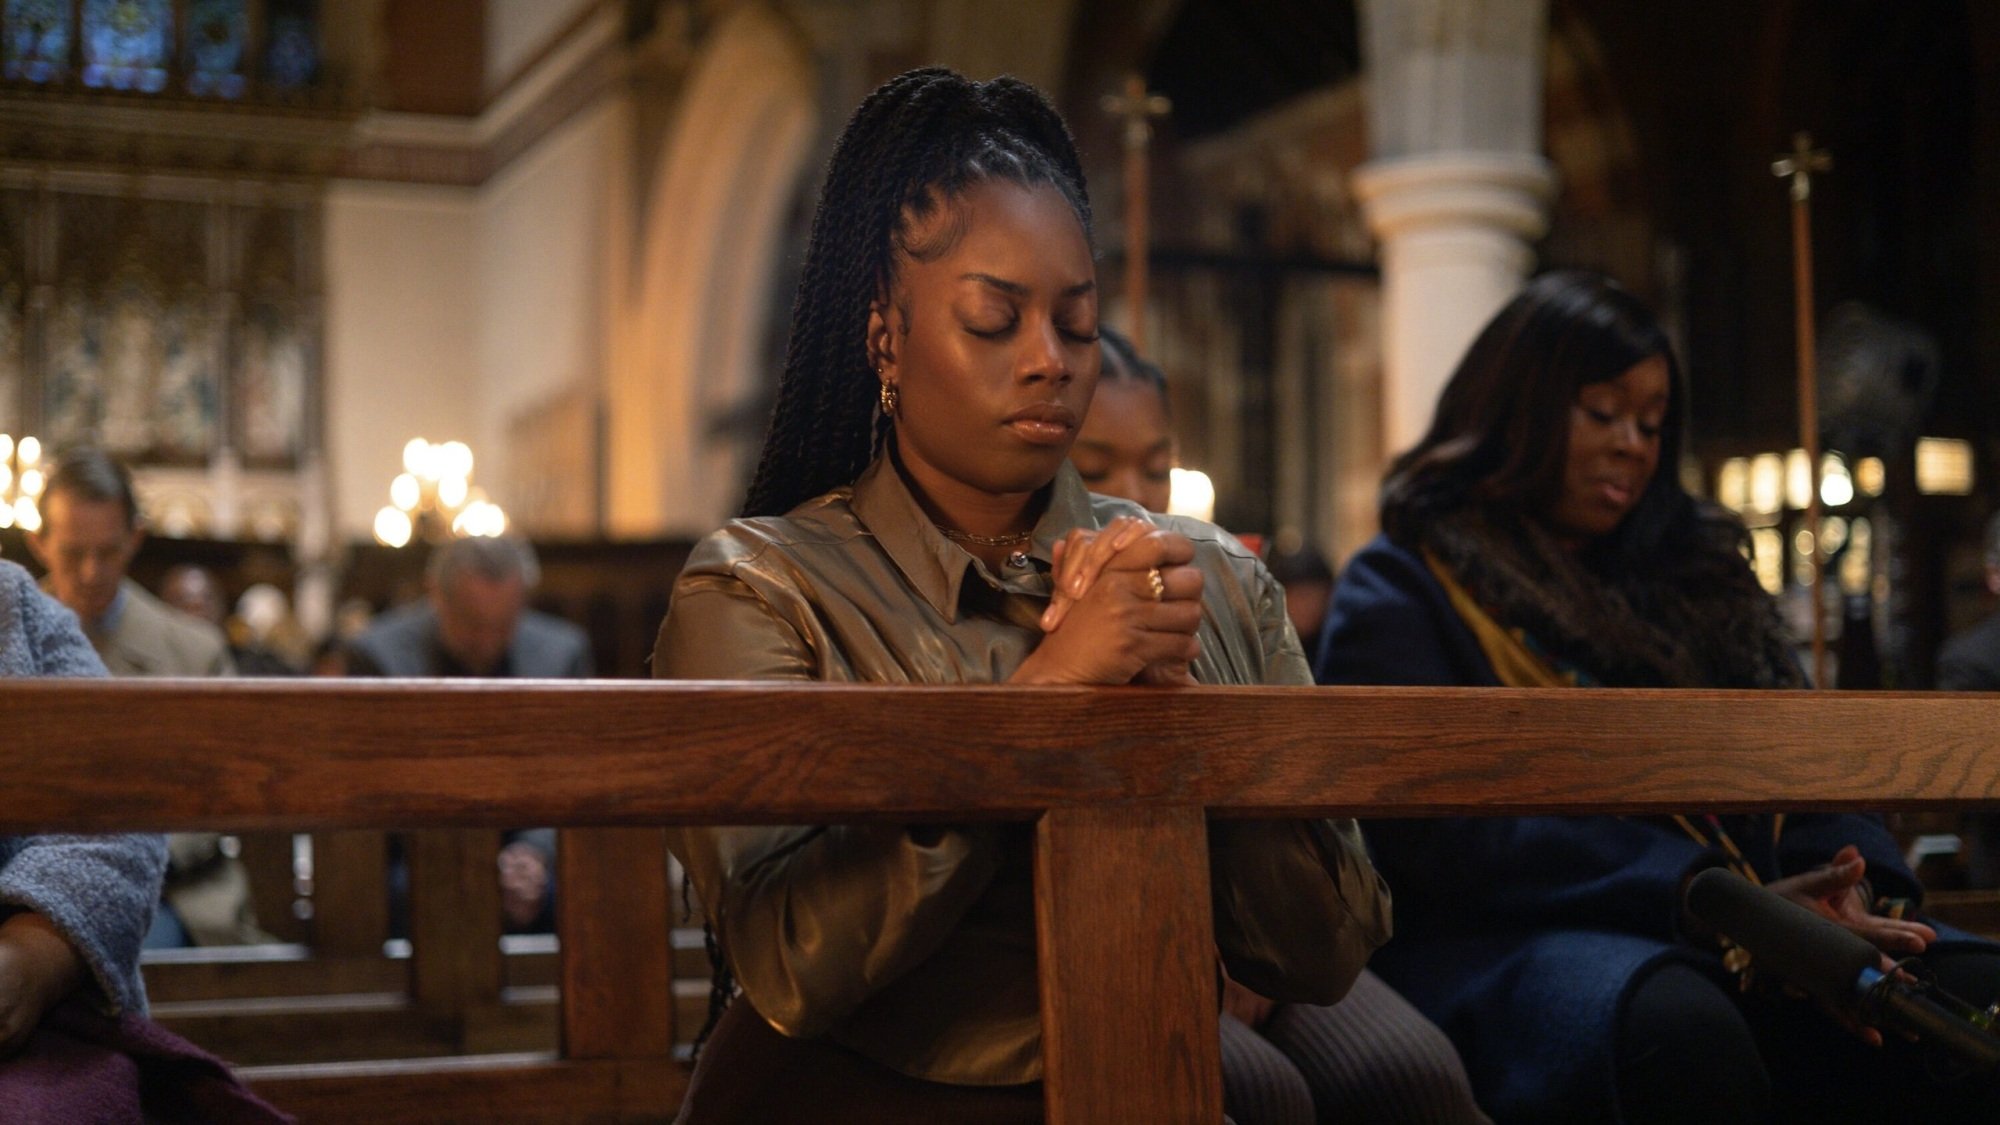 A young woman praying in a church pew.